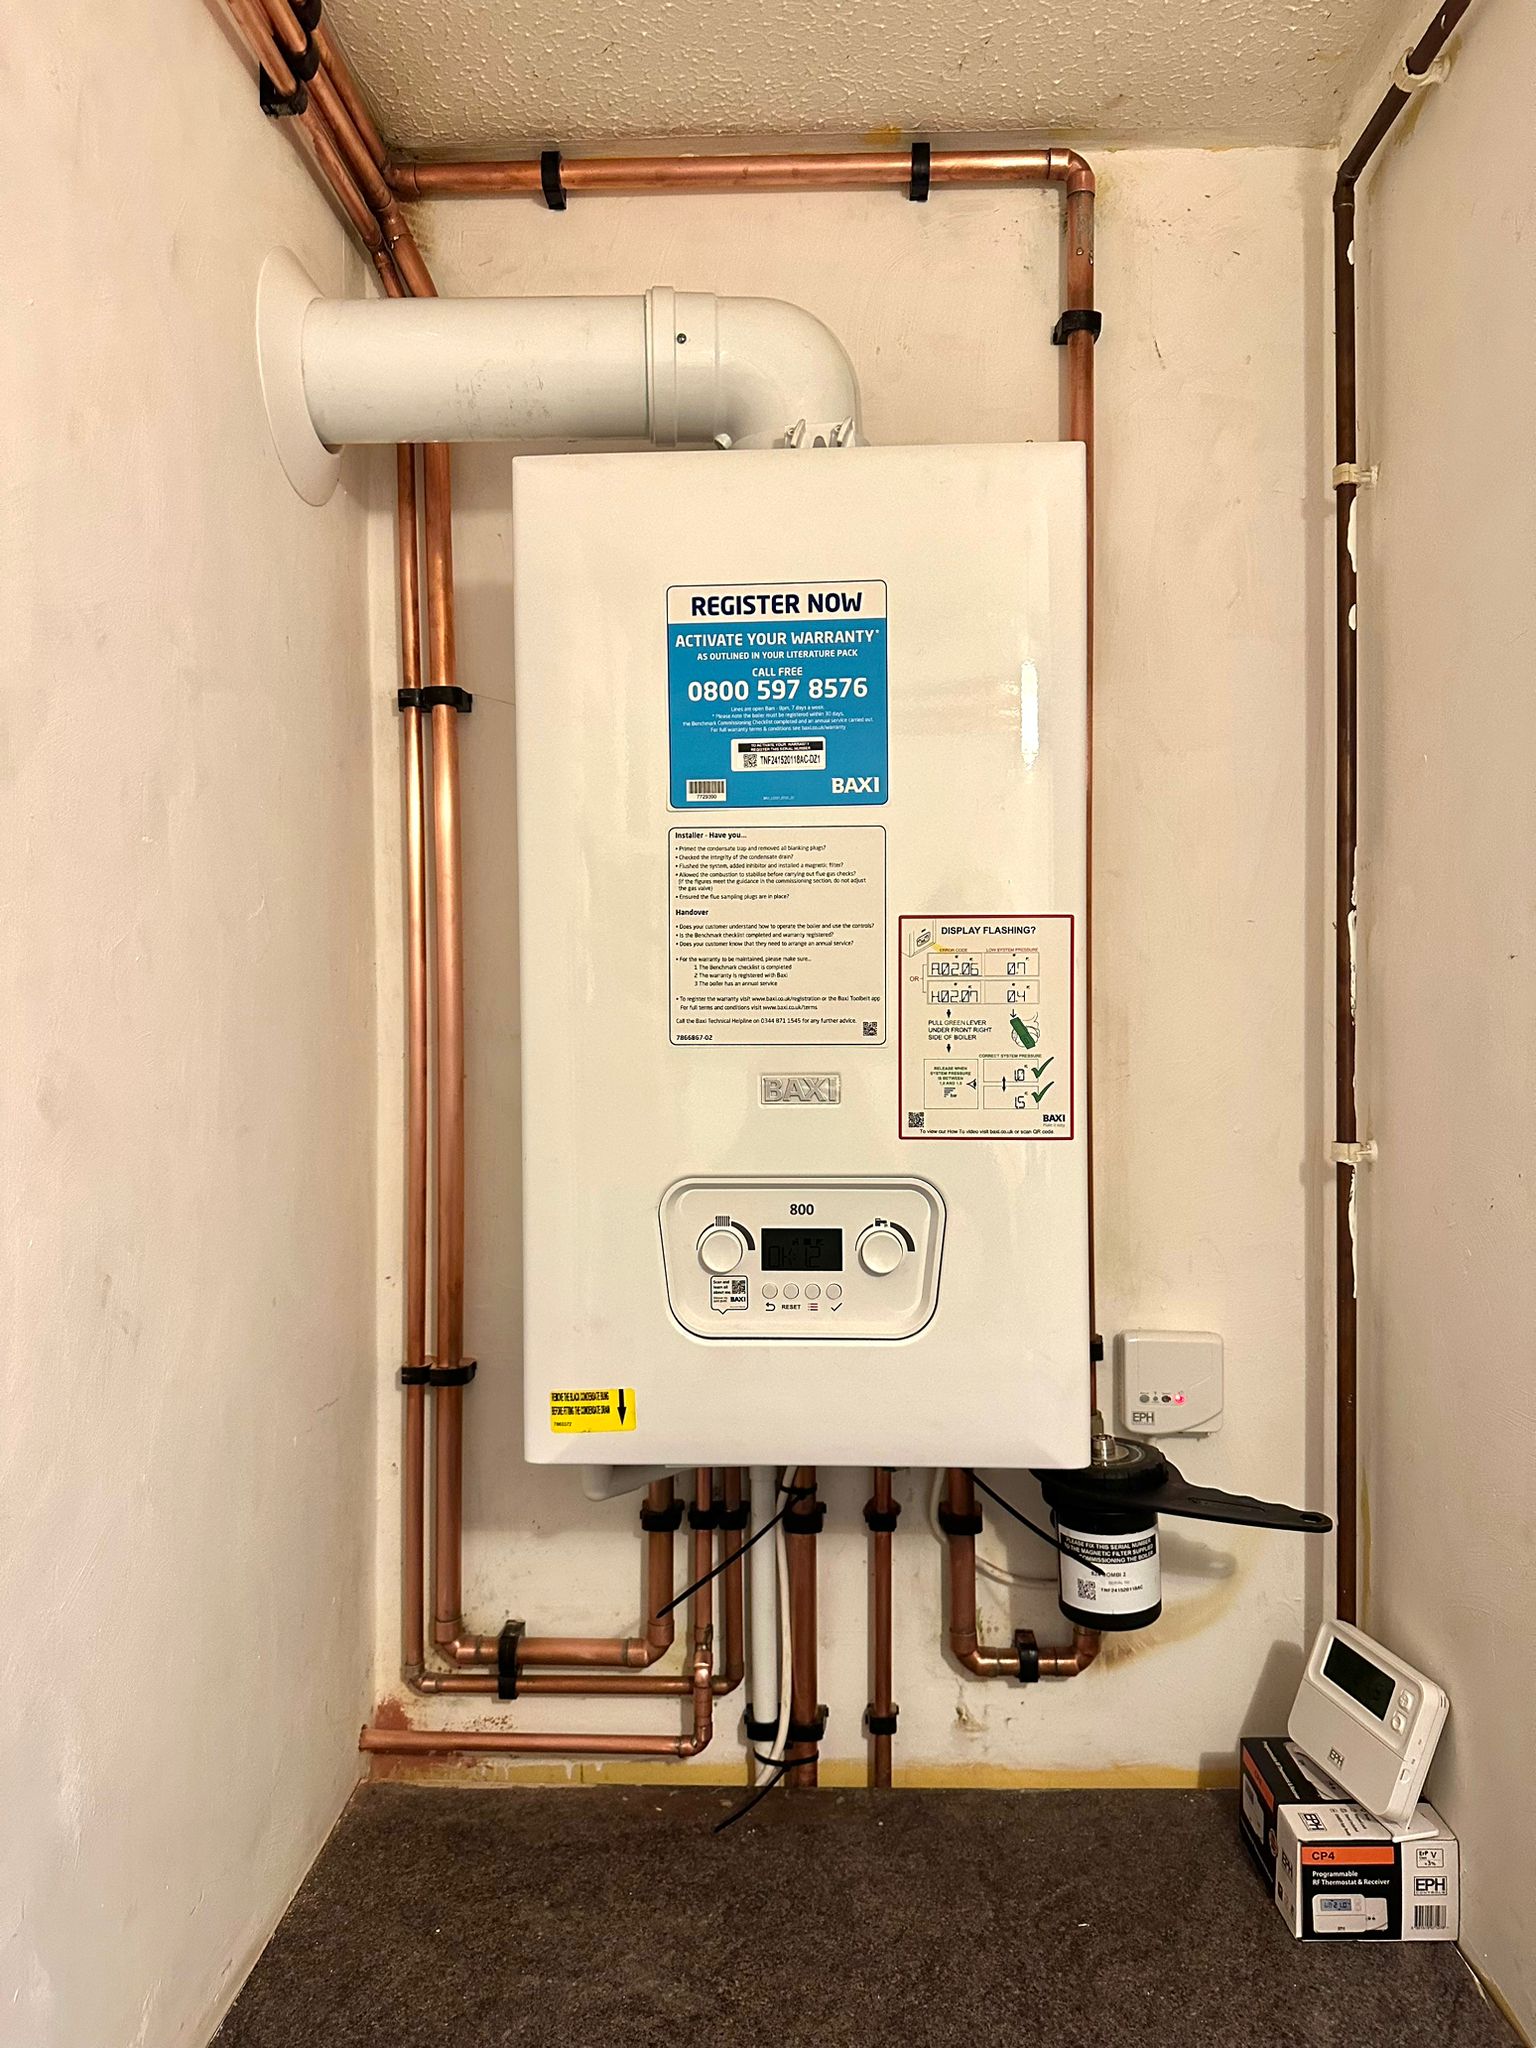 BAXI approved installers in Hutton, Essex